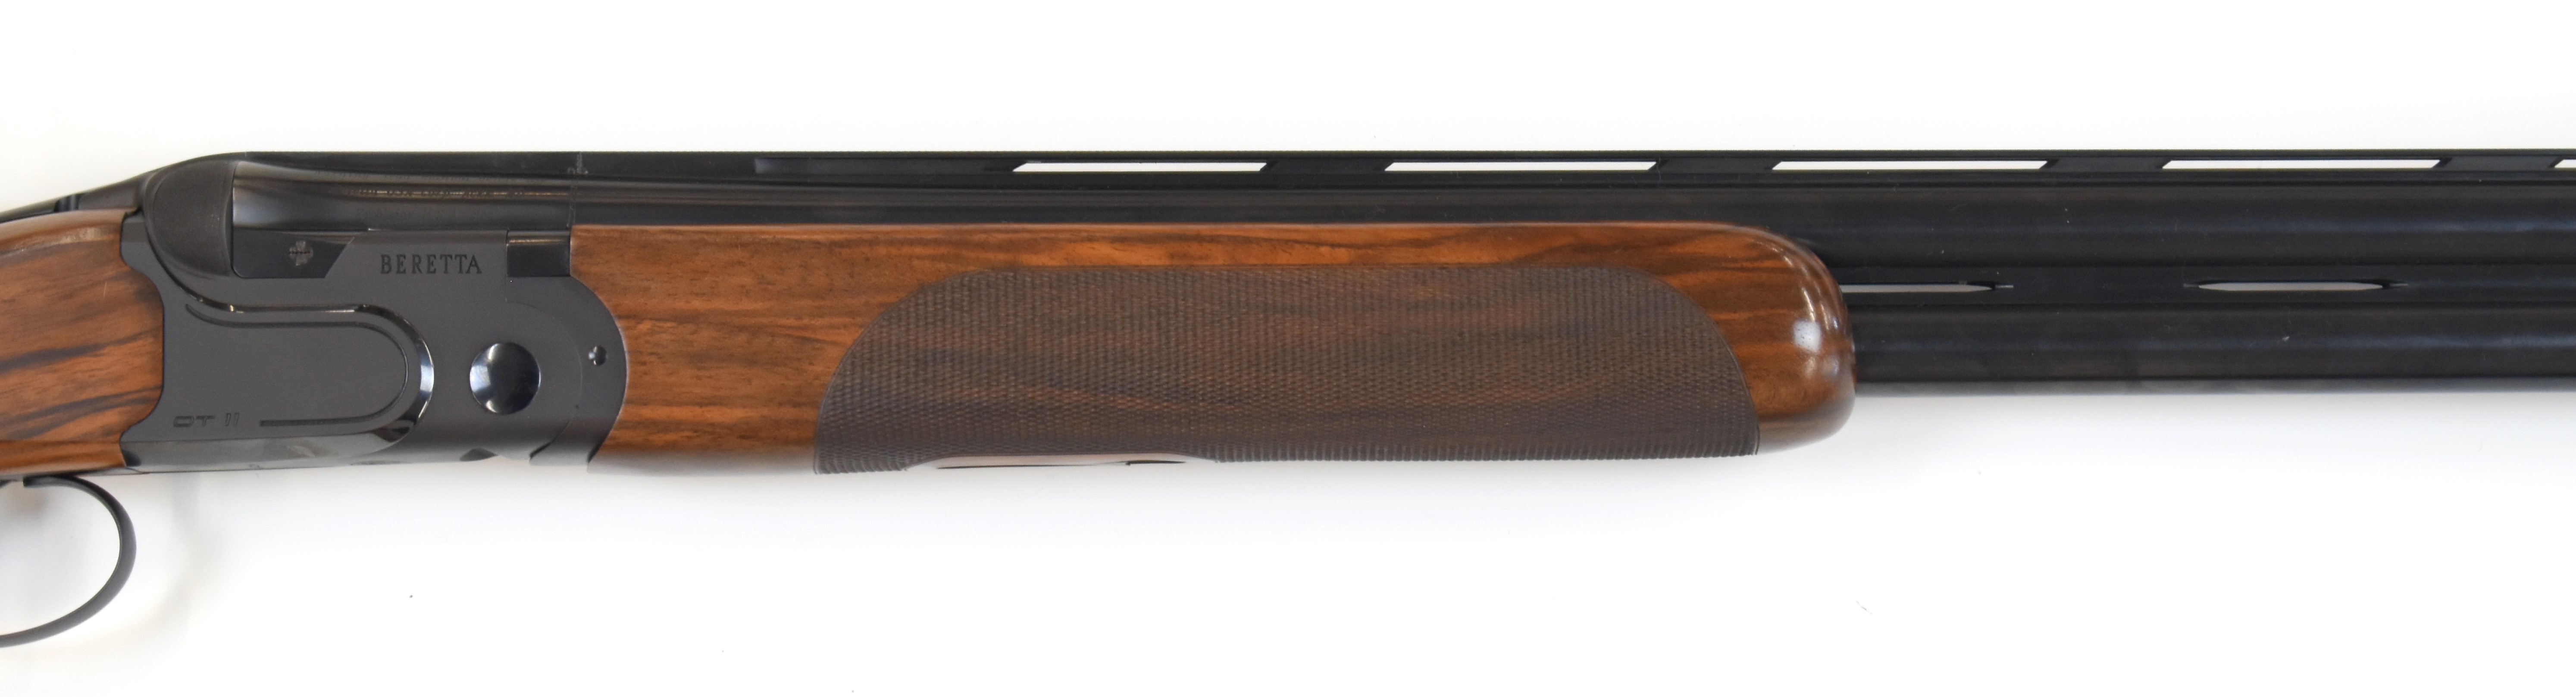 Beretta DT11 Sporting GMK 50th Anniversary Special Edition 12 bore over and under ejector shotgun - Image 4 of 13